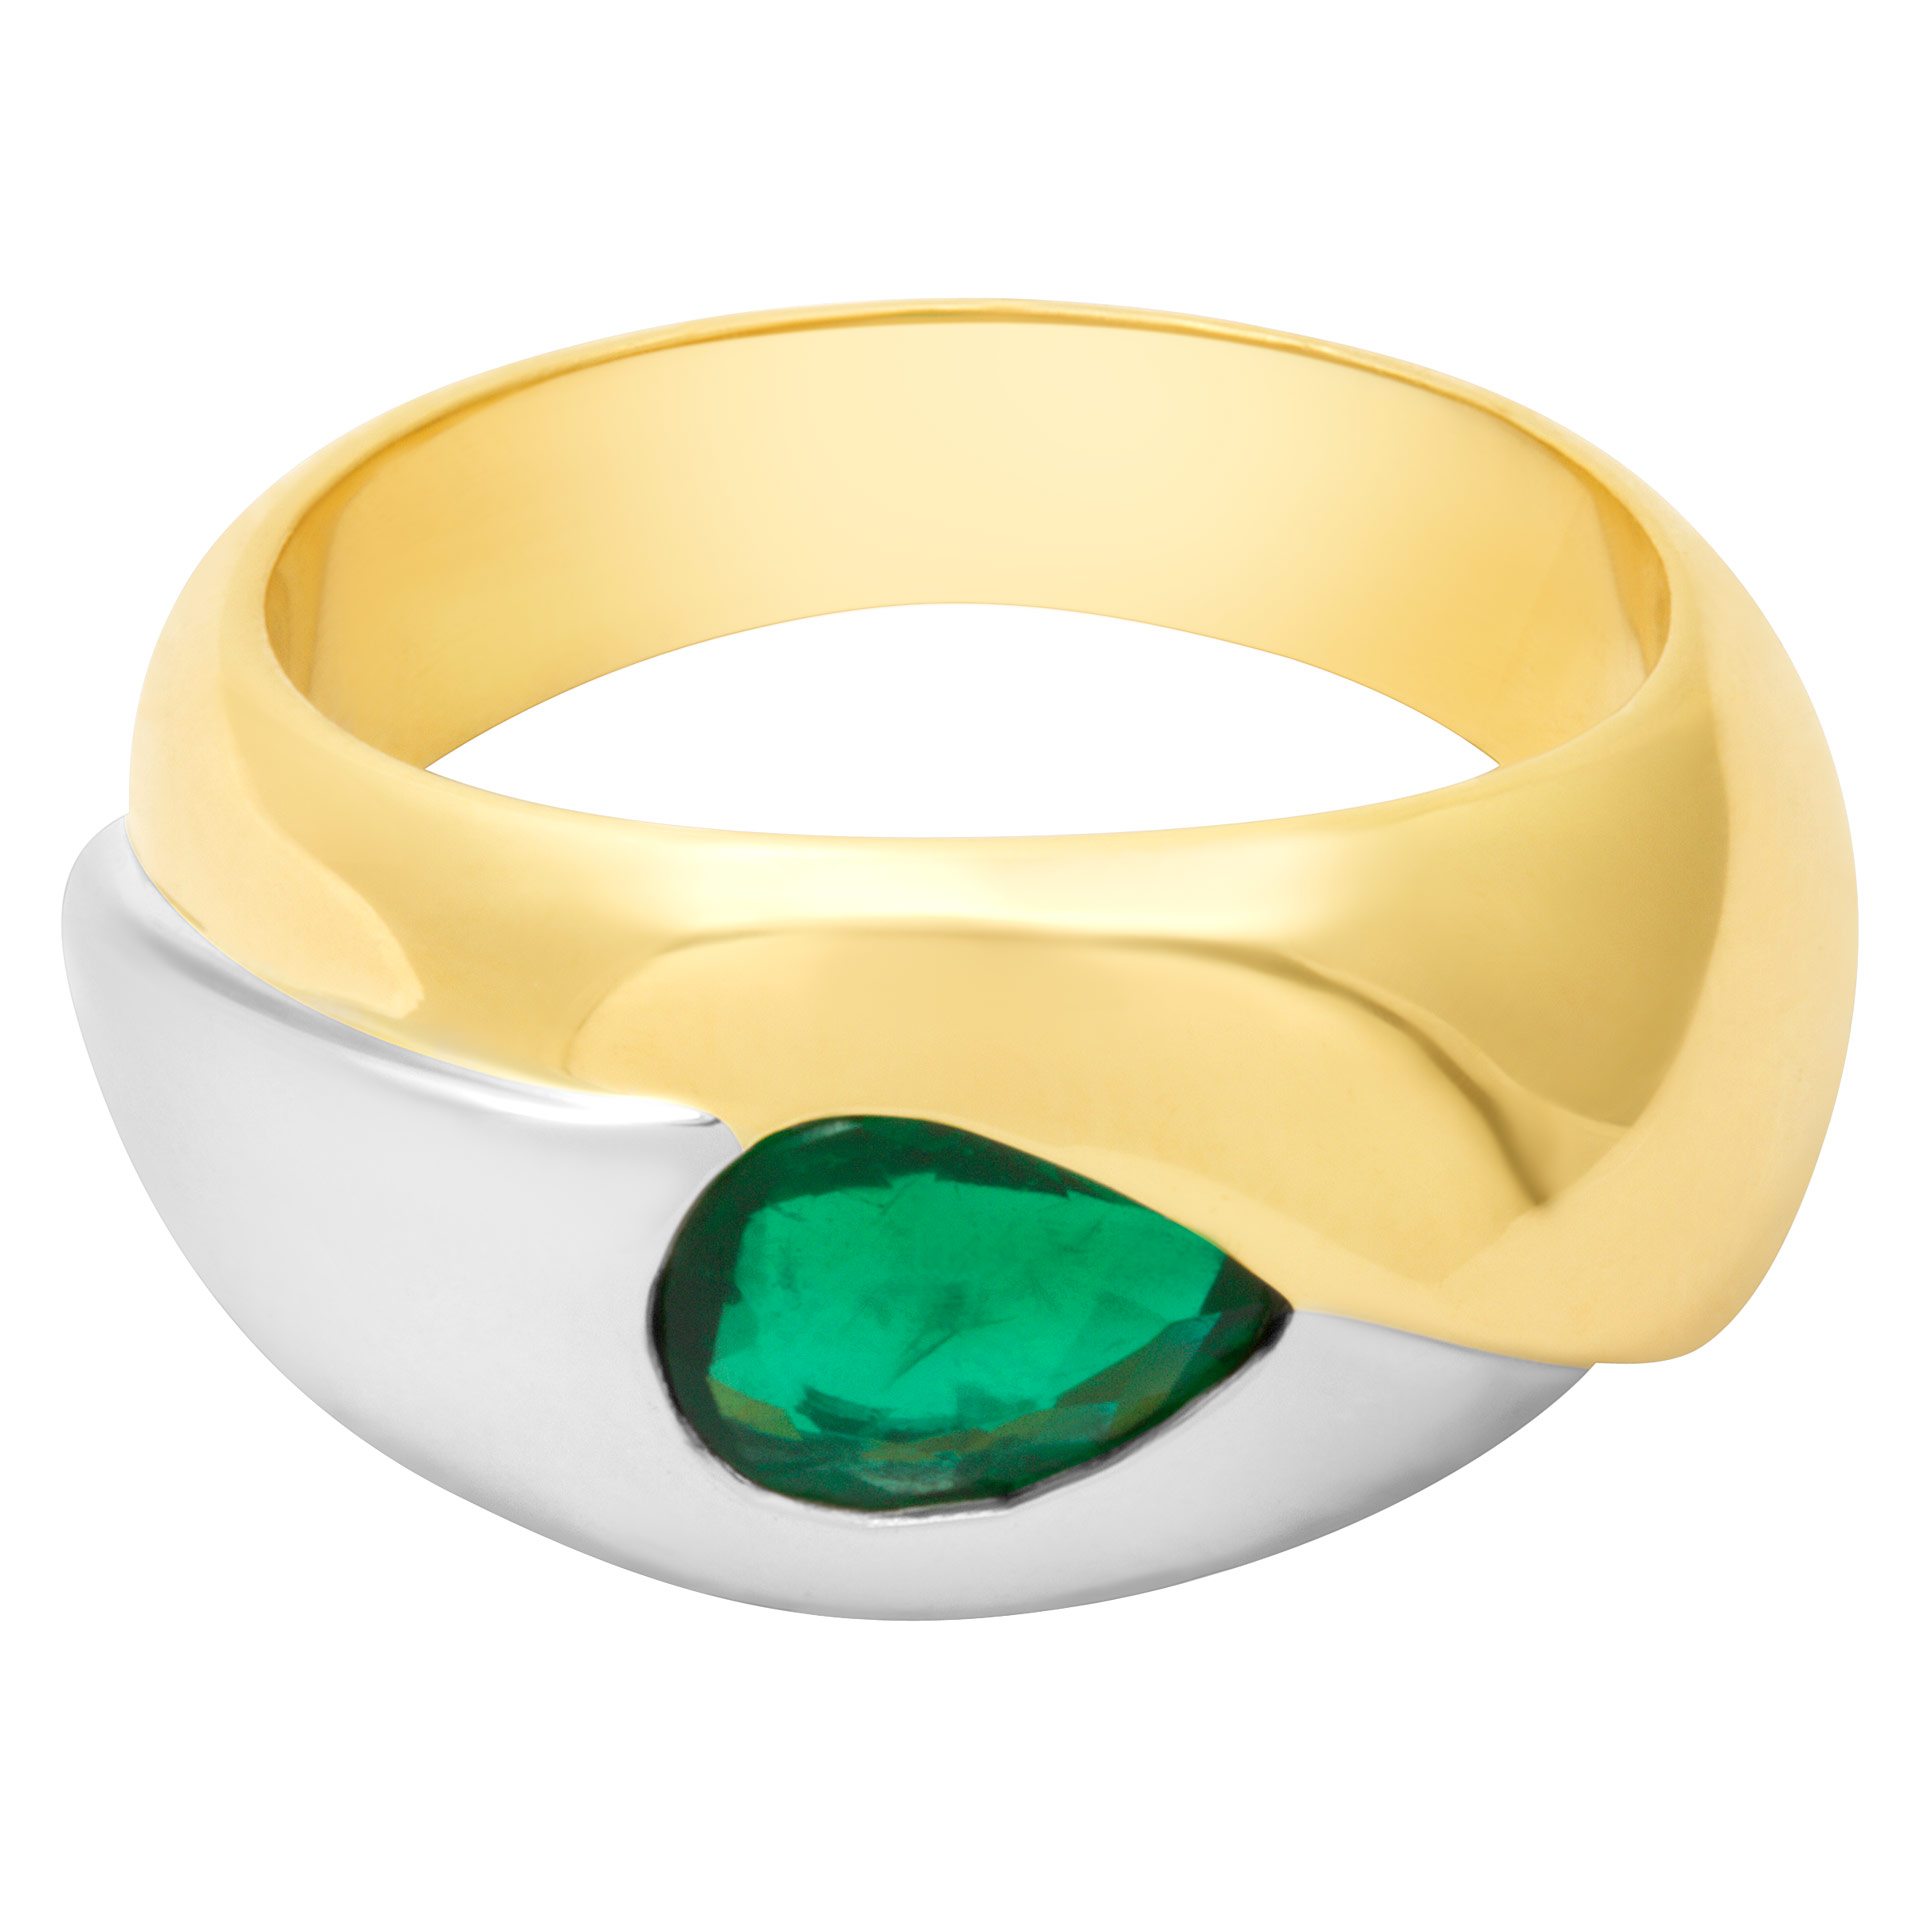 Swirl of 18k yellow and white gold ring featuring a 0.60 cts deep green emerald image 1